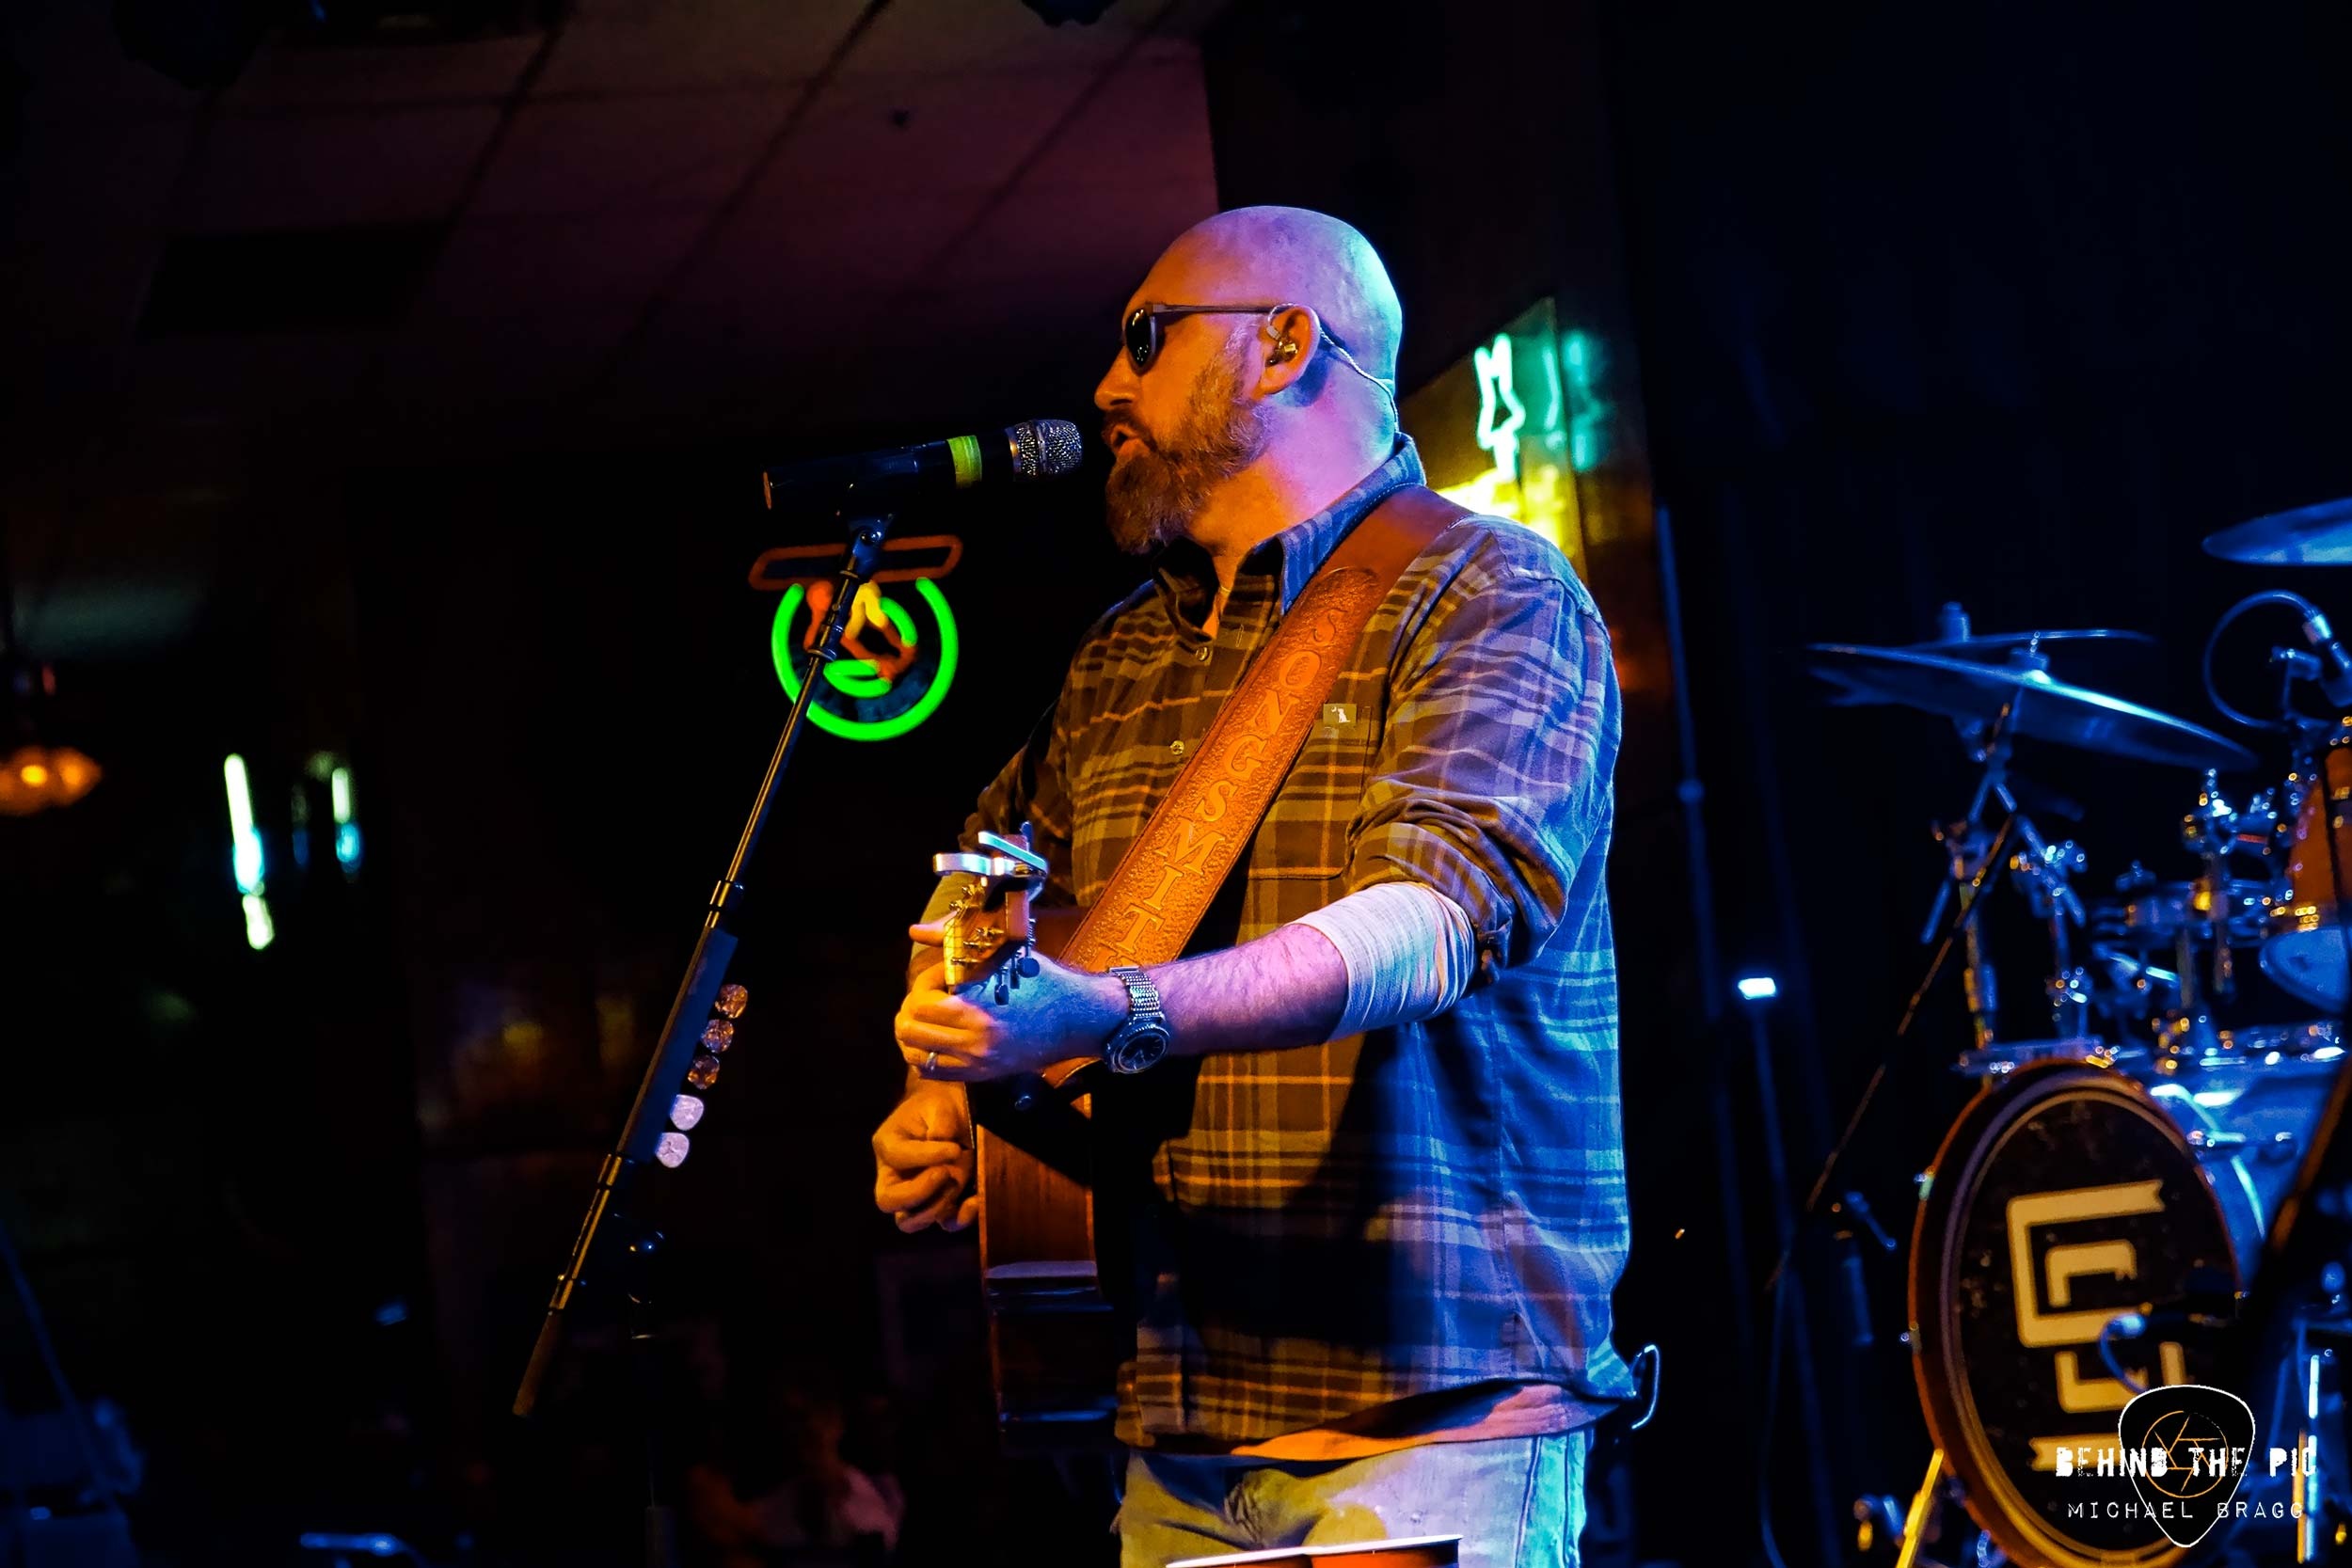 Corey Smith, Blind Horse Saloon, Behind the Pic, Singer, 2500x1670 HD Desktop